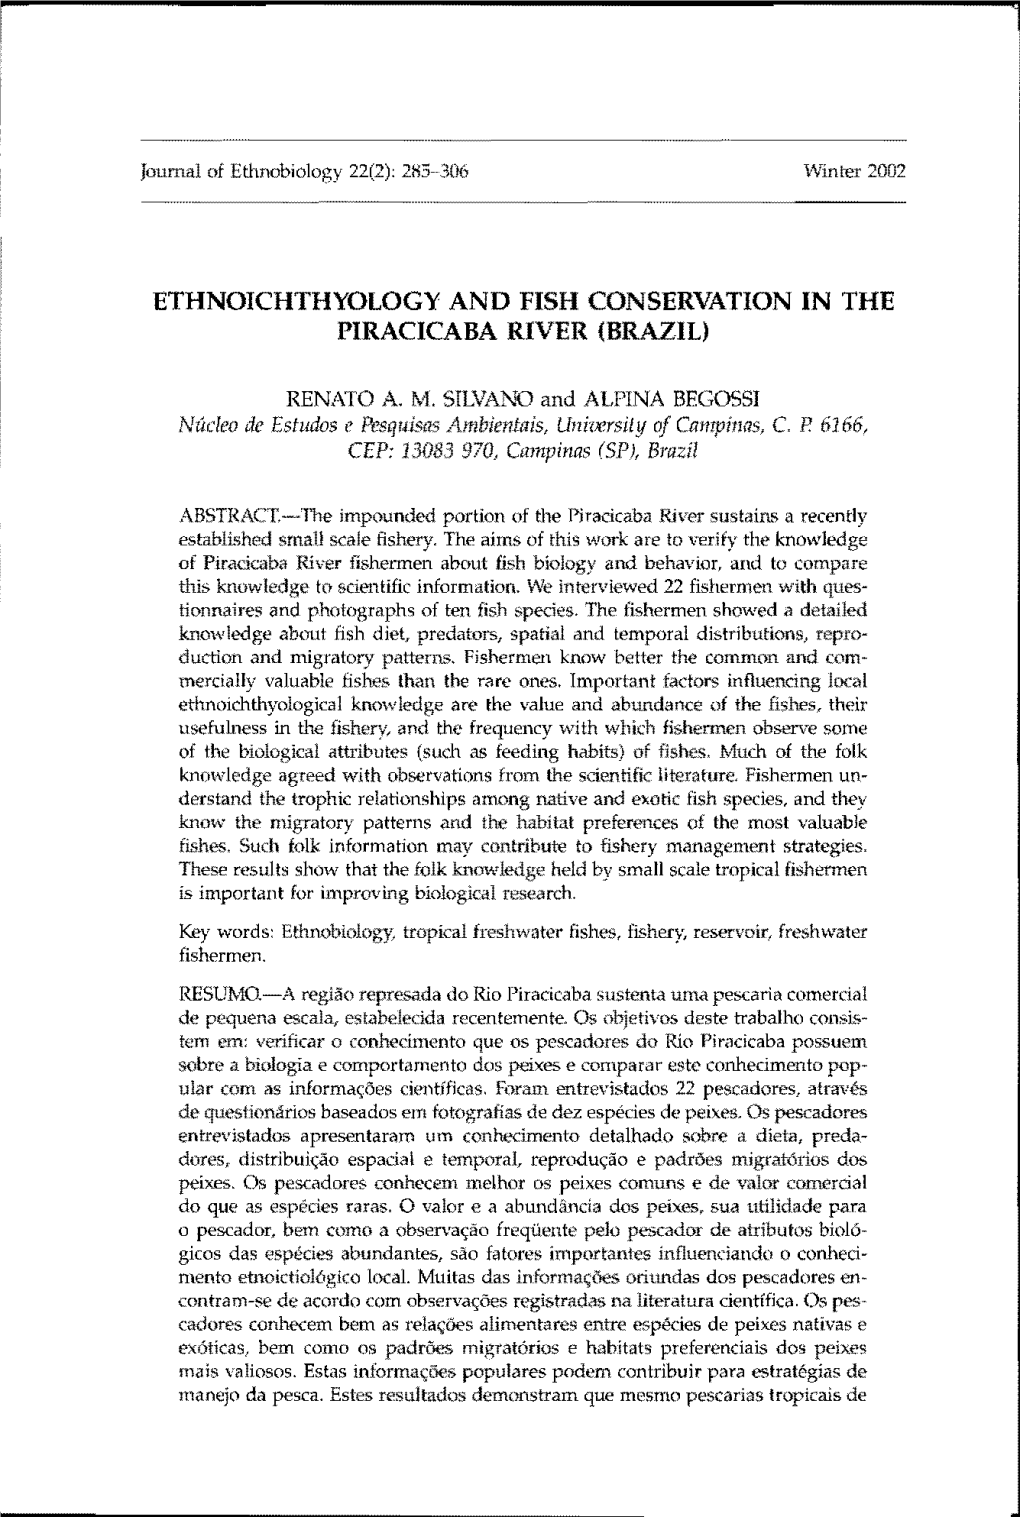 ETHNOICHTHYOLOGY and FISH CONSERVATION in the PIRACICABA RIVER (Brazill